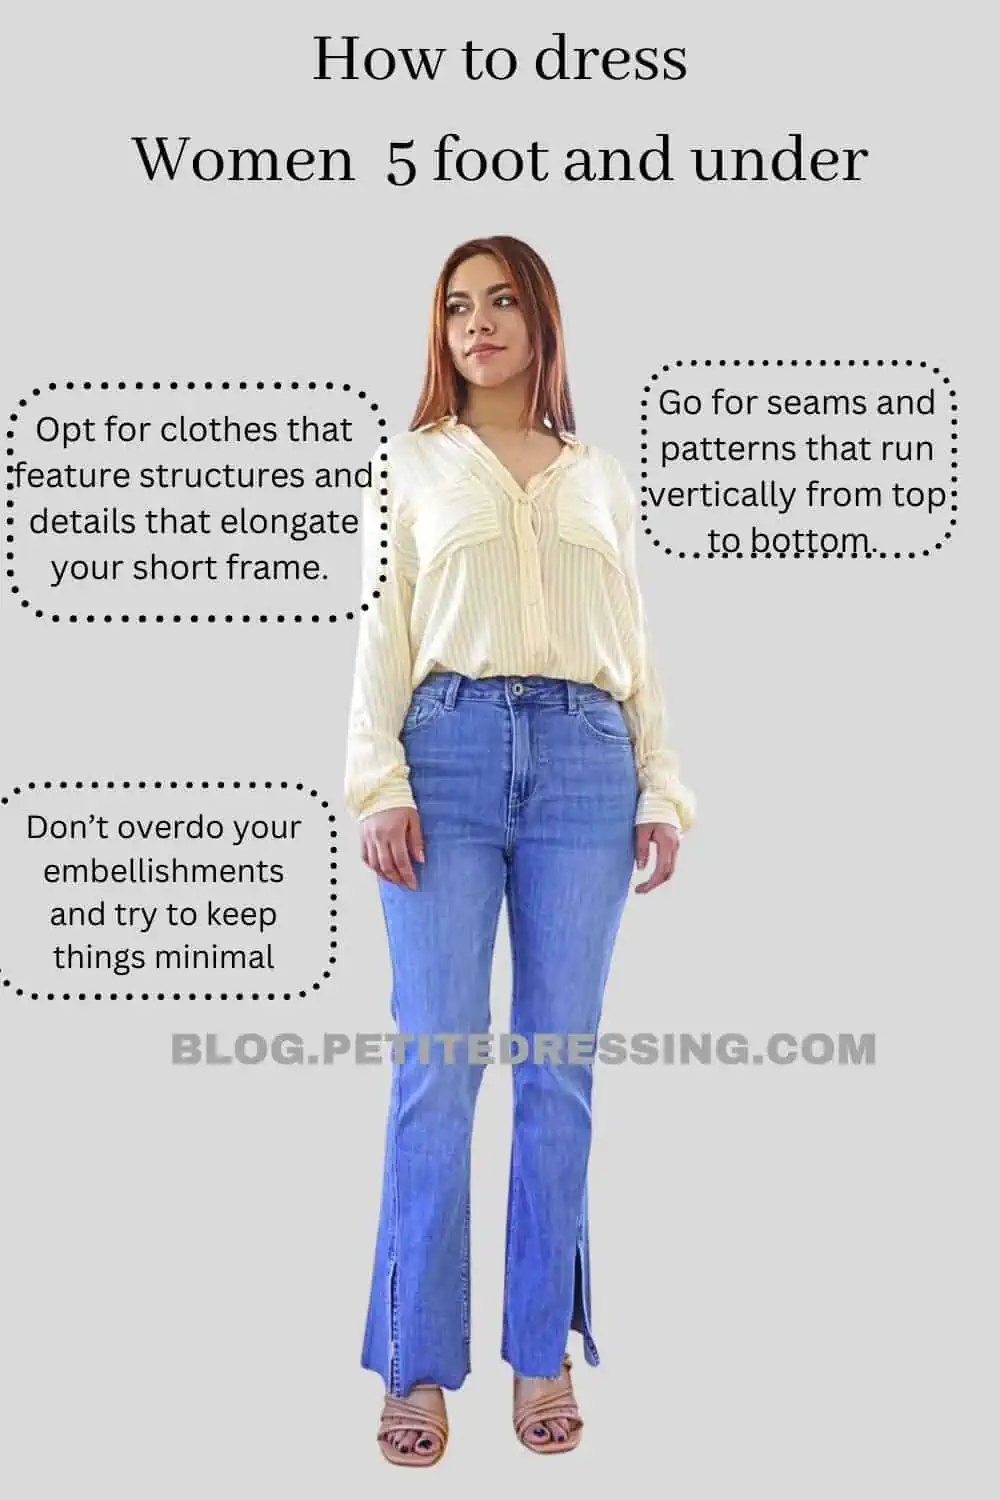 What Not To Wear if you are 5 Foot And Under - Petite Dressing